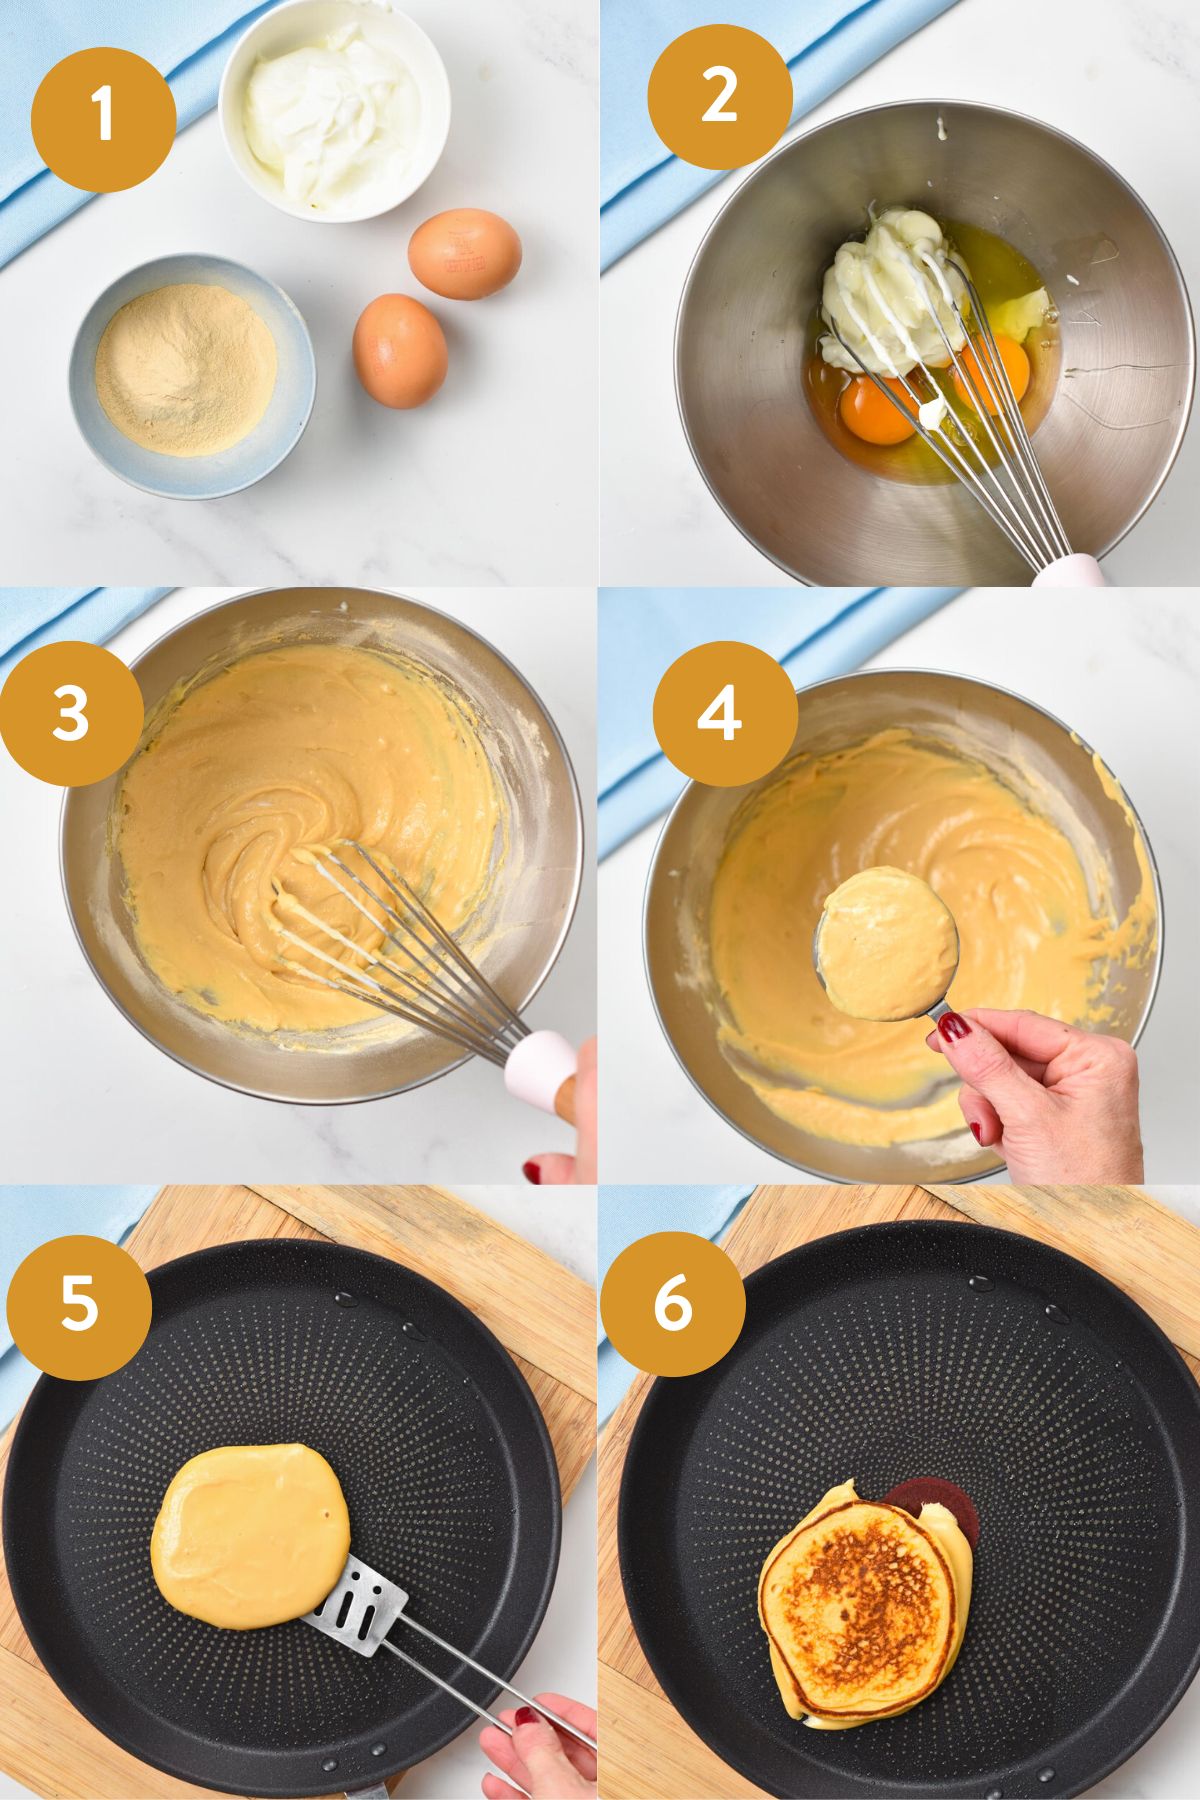 Step by step instructions to making 3-ingredient protein pancakes.